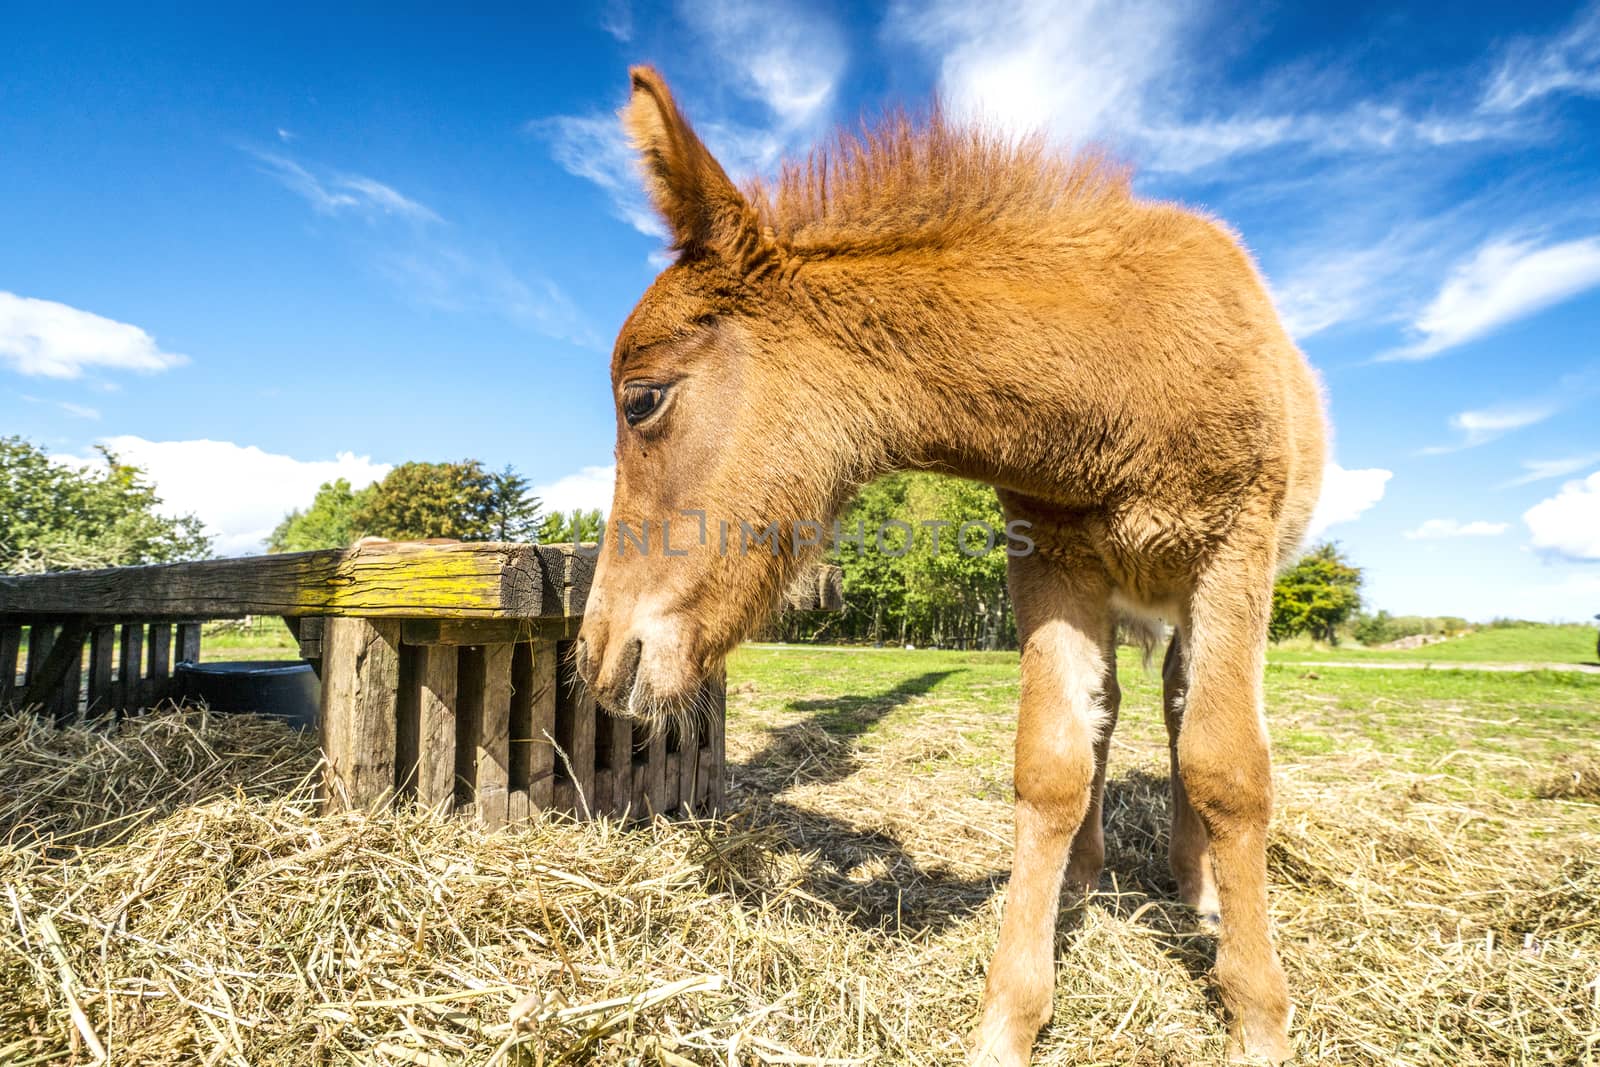 Foal eating hay at a farm in the summer under a blue sky in rural environment